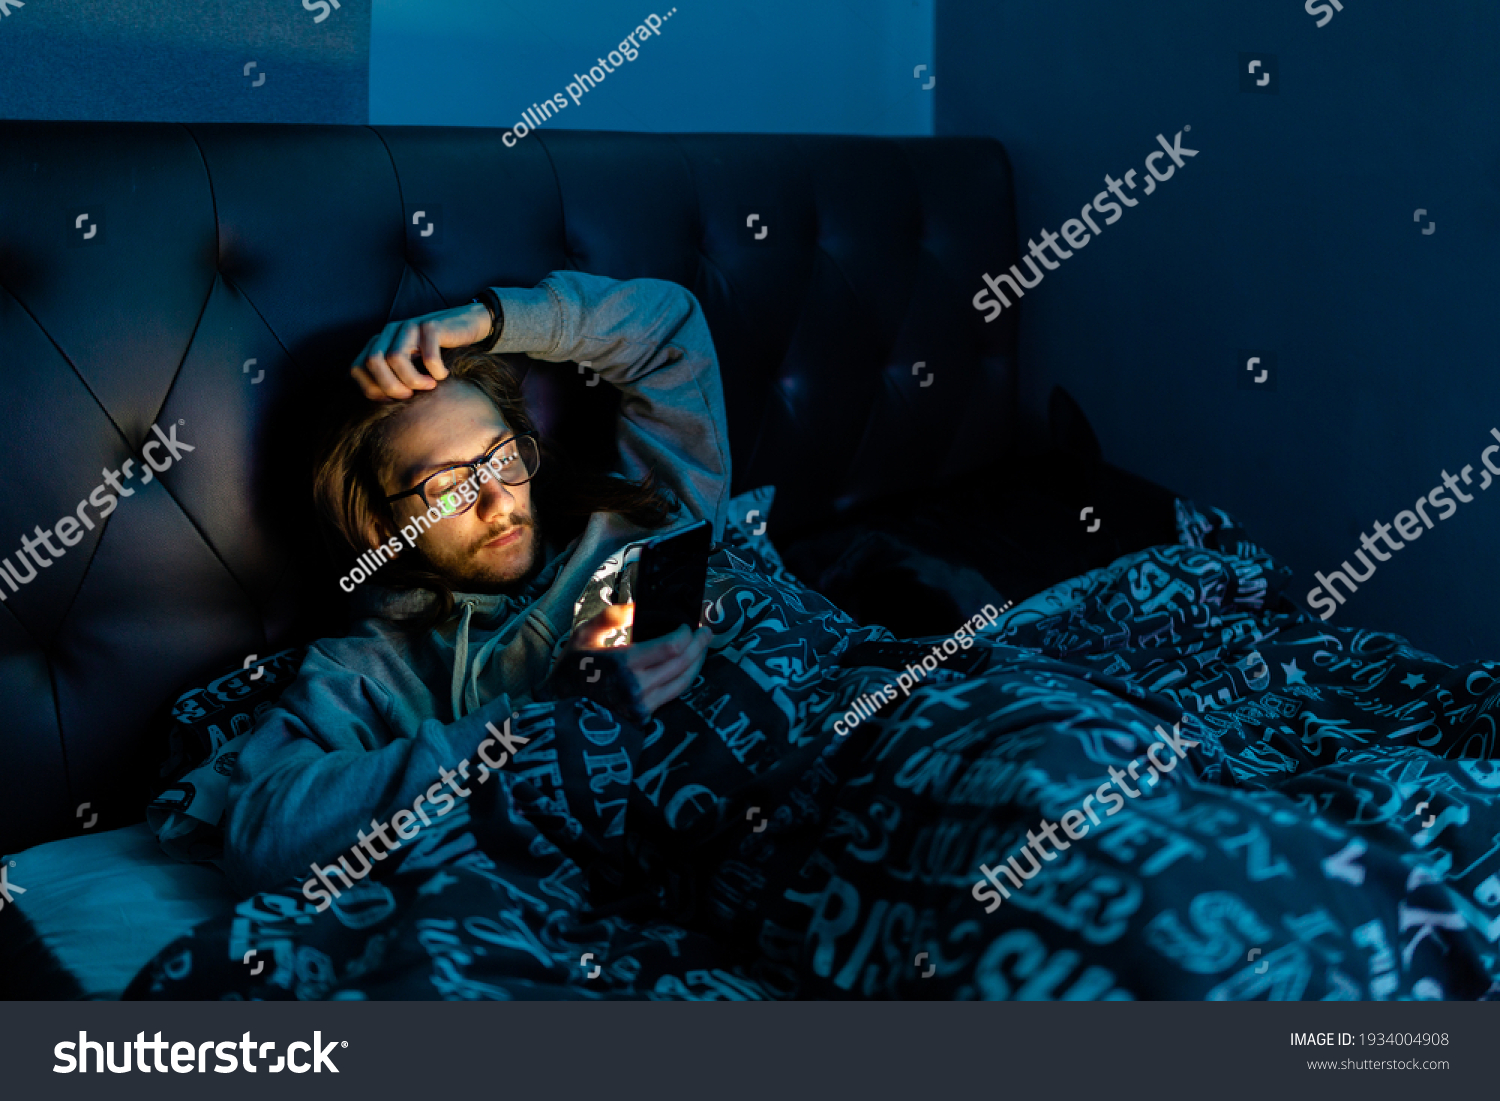 A young man addicted to social media checking his phone before going to bed, Addiction, social media, after dark concept #1934004908